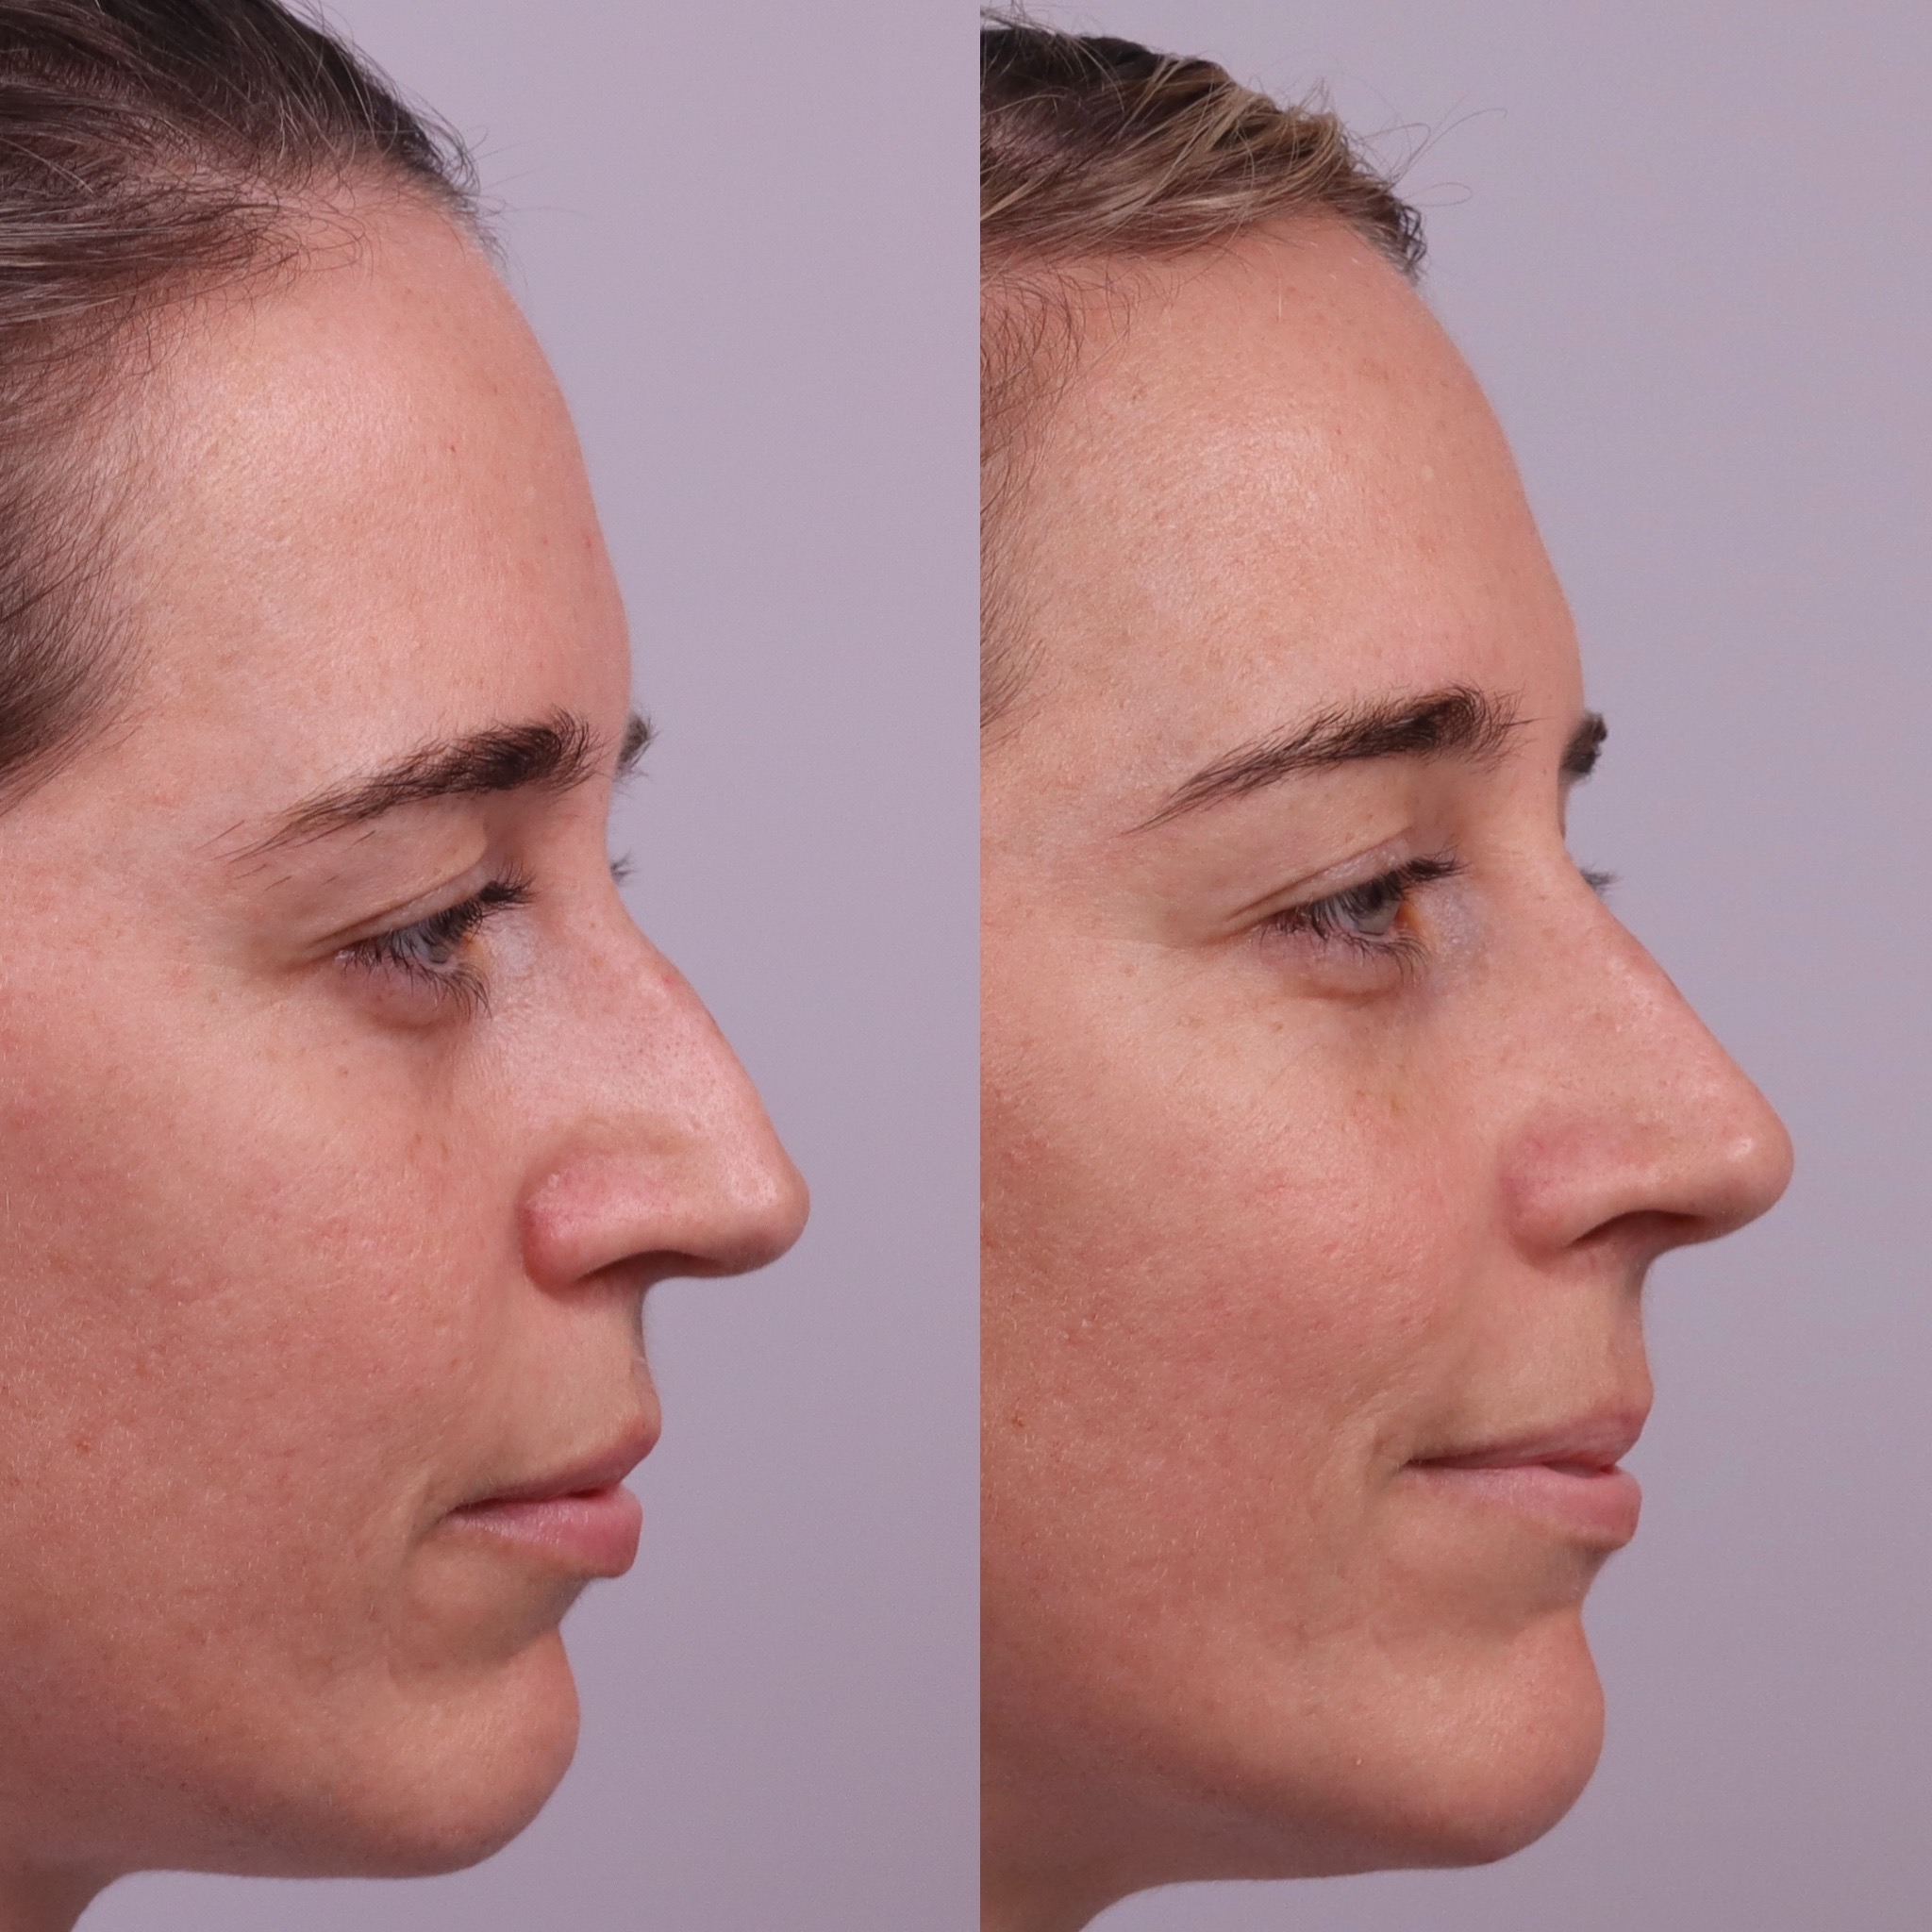 Before and after nose filler photographs